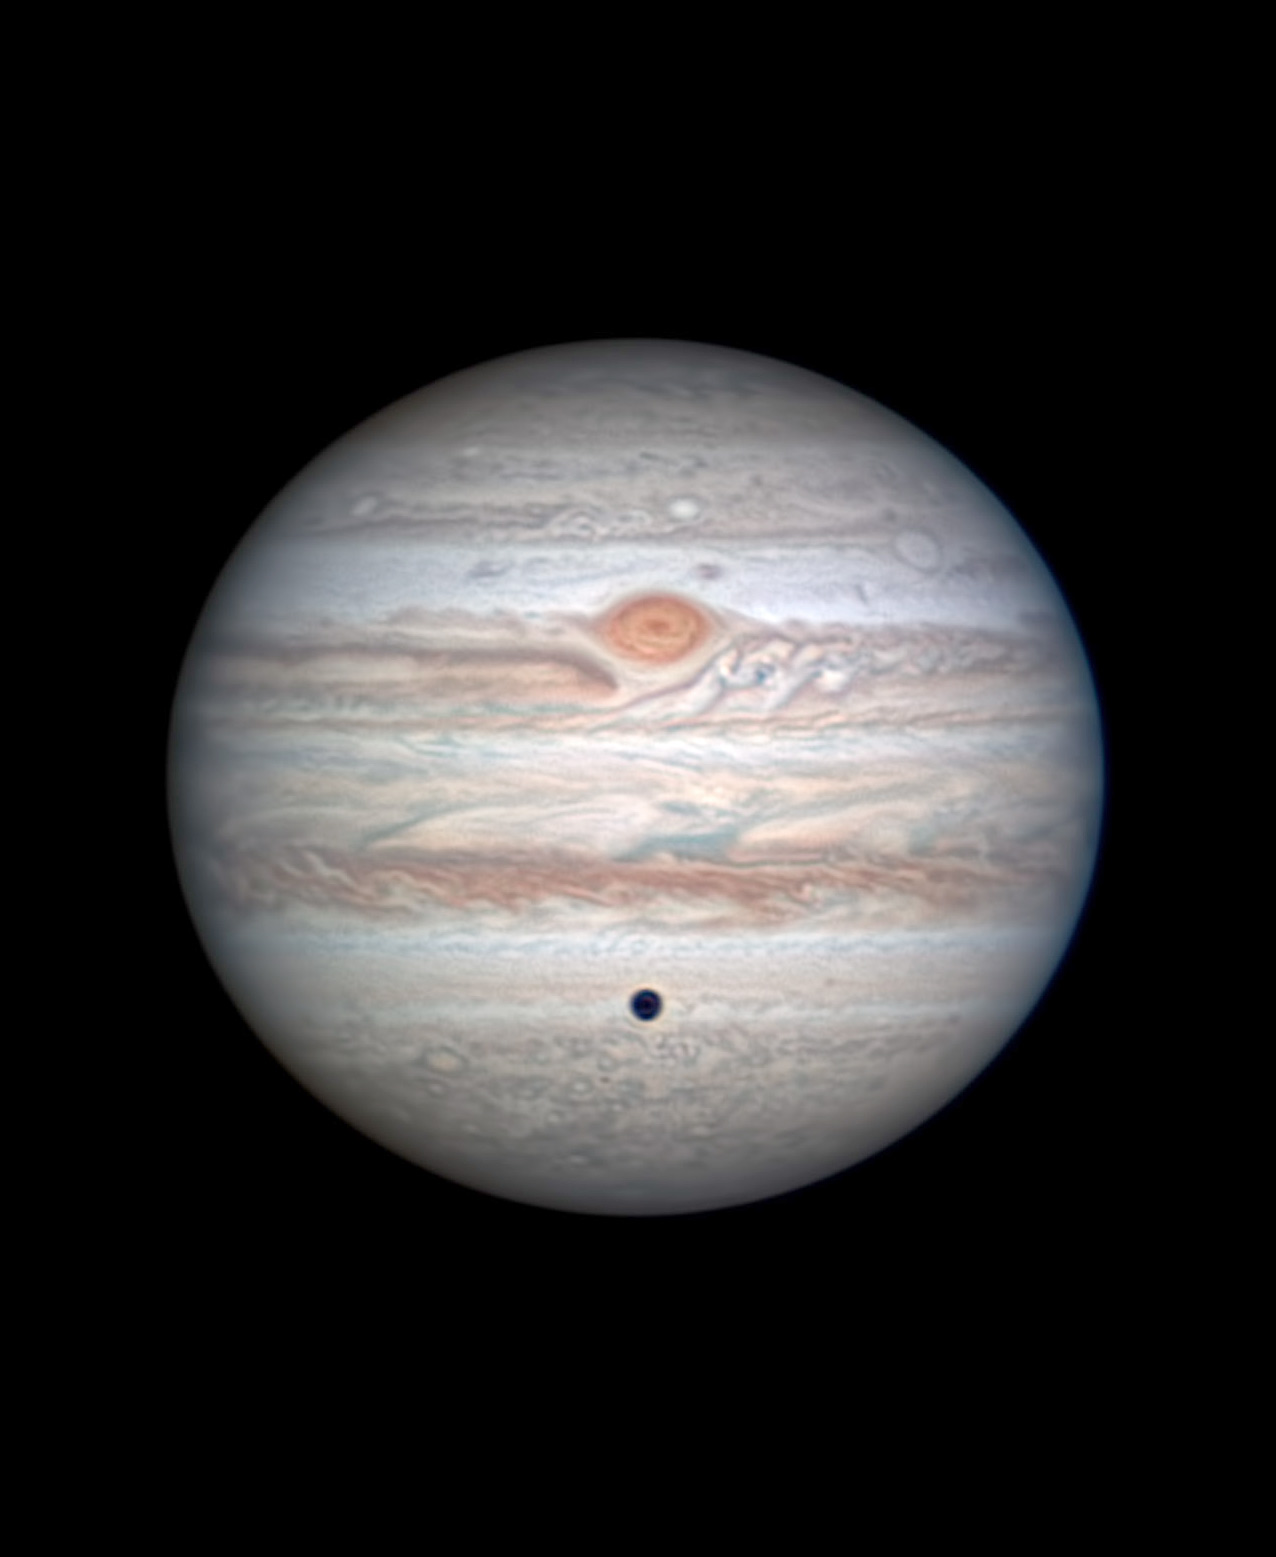 Jupiter with Great Red Spot near the central meridian and Callisto in transit, June 22, 2020 